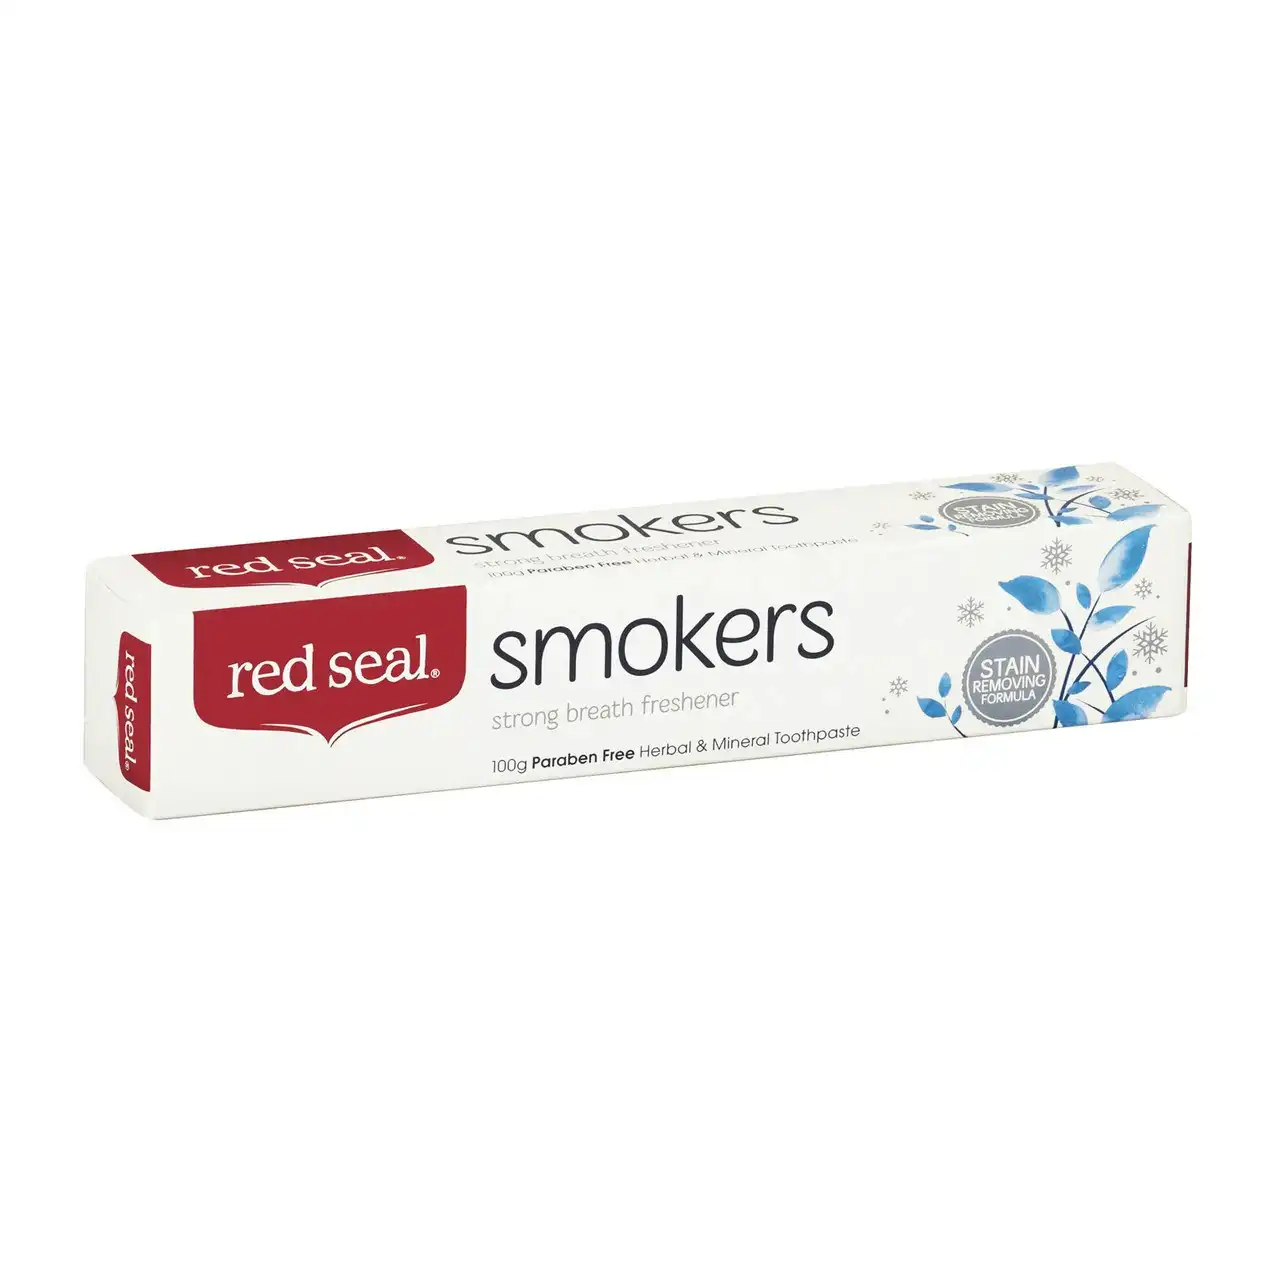 Red Seal Smokers Breath Freshener Herbal & Mineral Toothpaste 100g